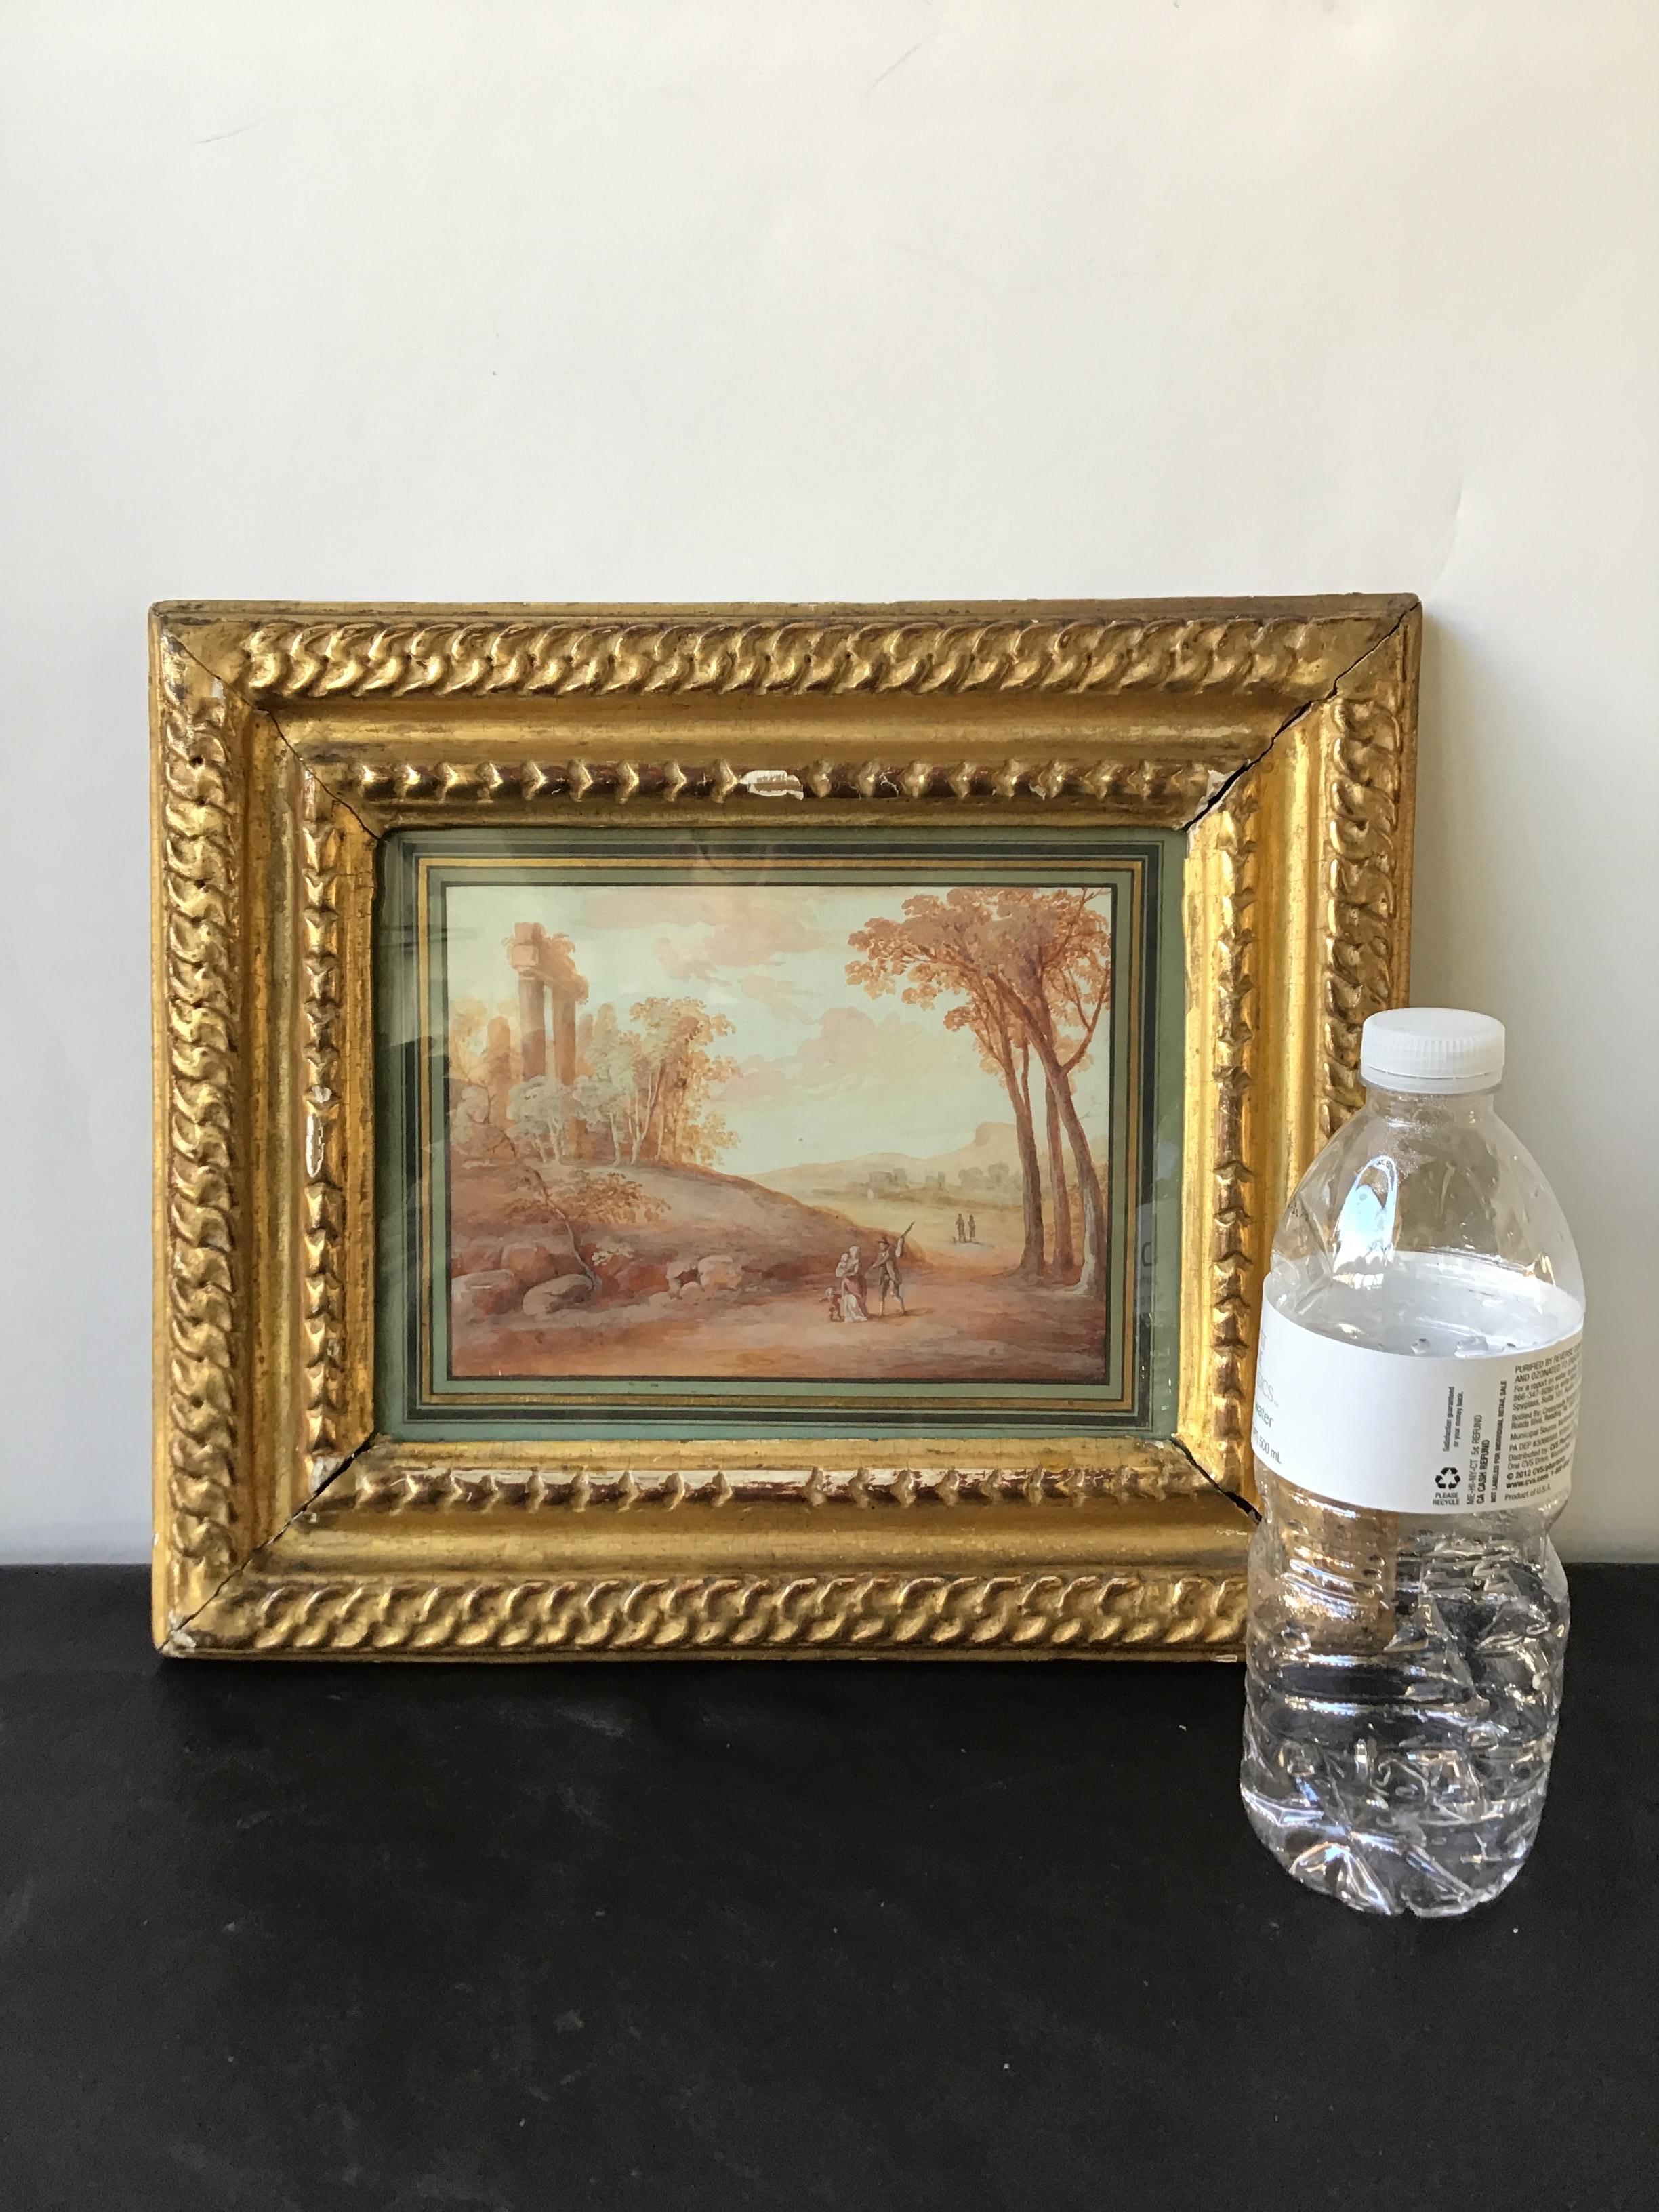 Pair of early 1800s water colors of French pastoral scenes attributed to J.B. Huet. Out of a Scarsdale, N.Y. estate.